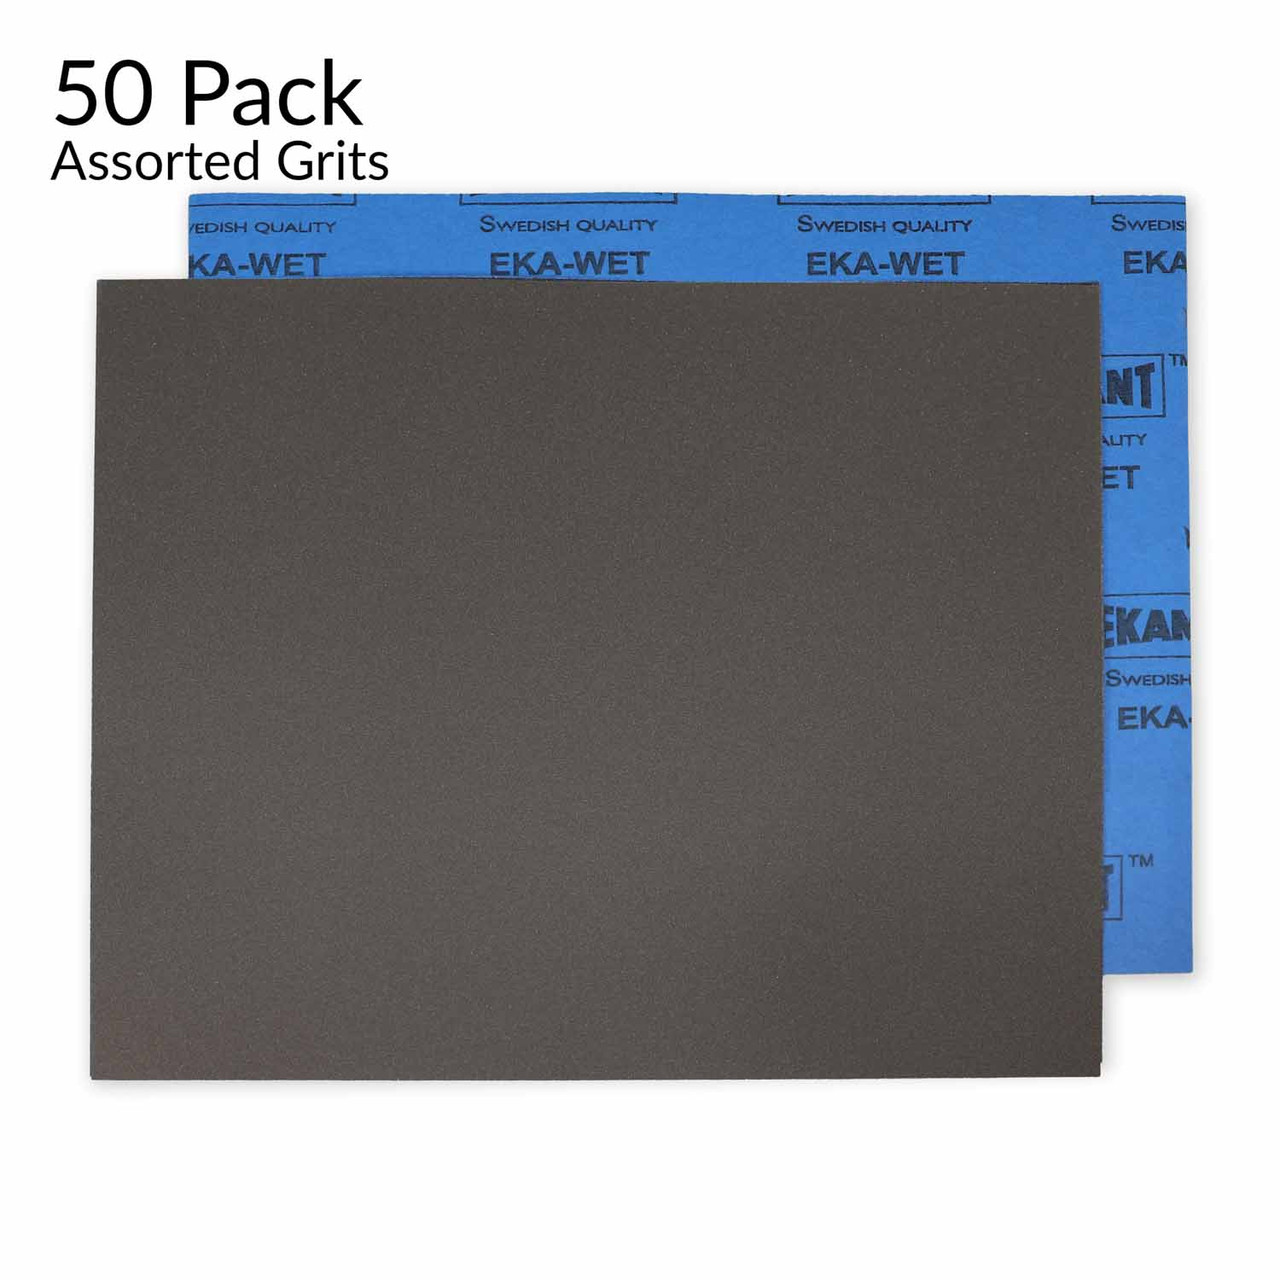 Hurricane SC Wet-Dry, 9" x 11" Silicon Carbide Sandpaper, High Grit Variety Pack, 50 Sheets